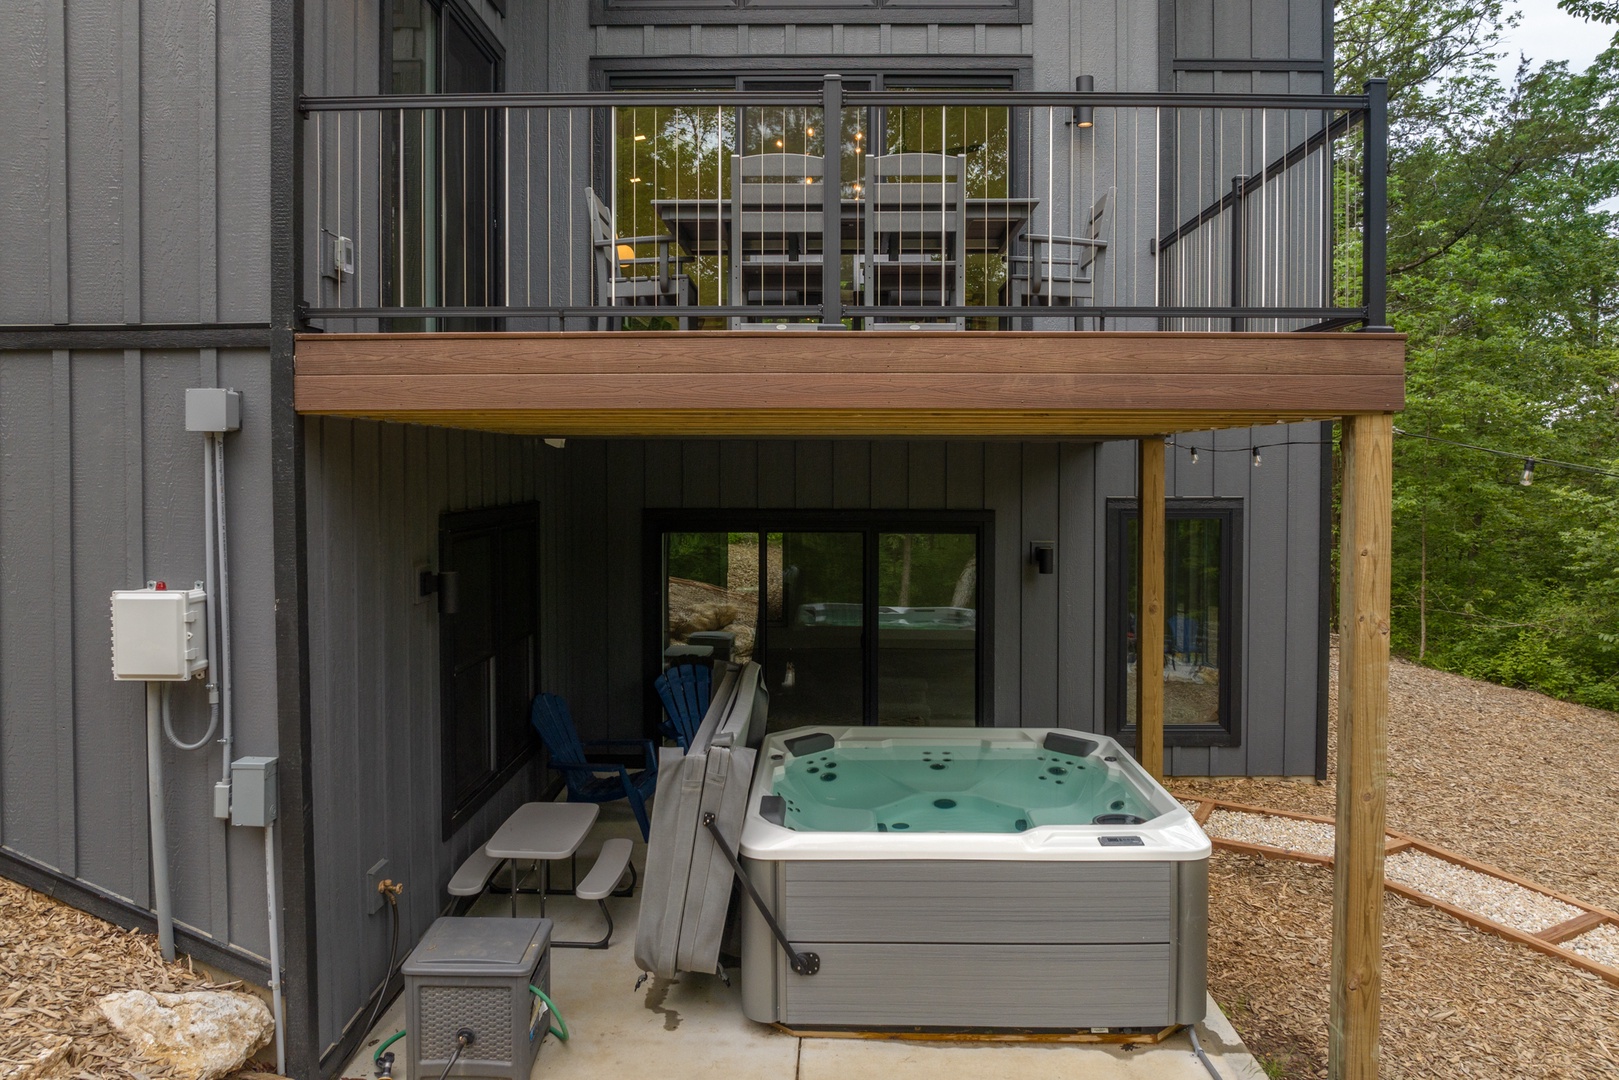 Enjoy ultimate relaxation in the hot tub while looking out at the iconic Innsbrook landscape